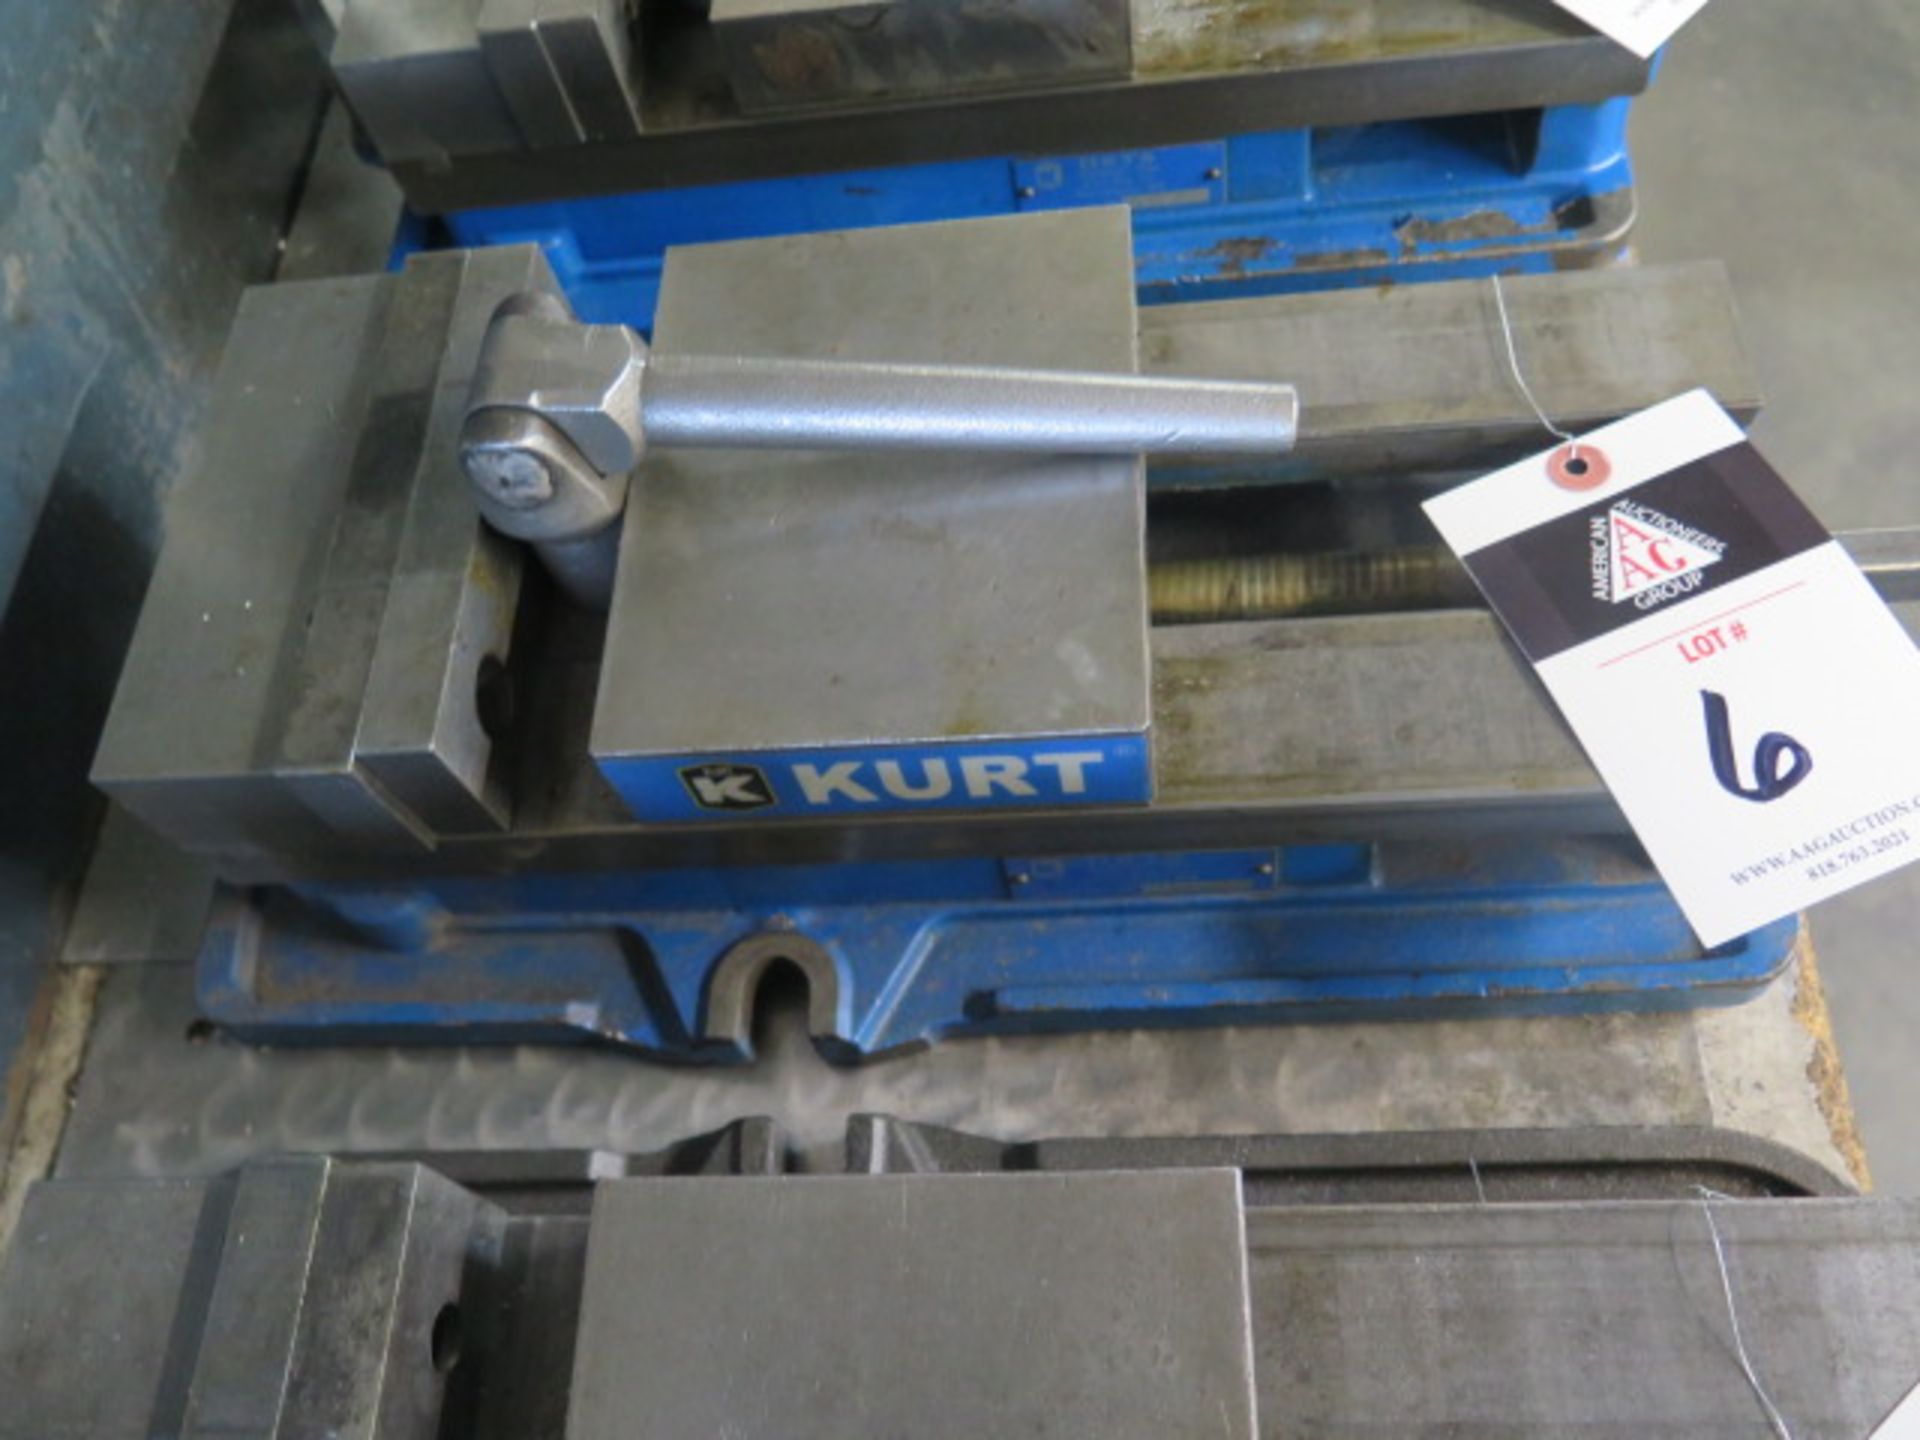 Kurt D675 6" Angle-Lock Vise (SOLD AS-IS - NO WARRANTY) - Image 2 of 4